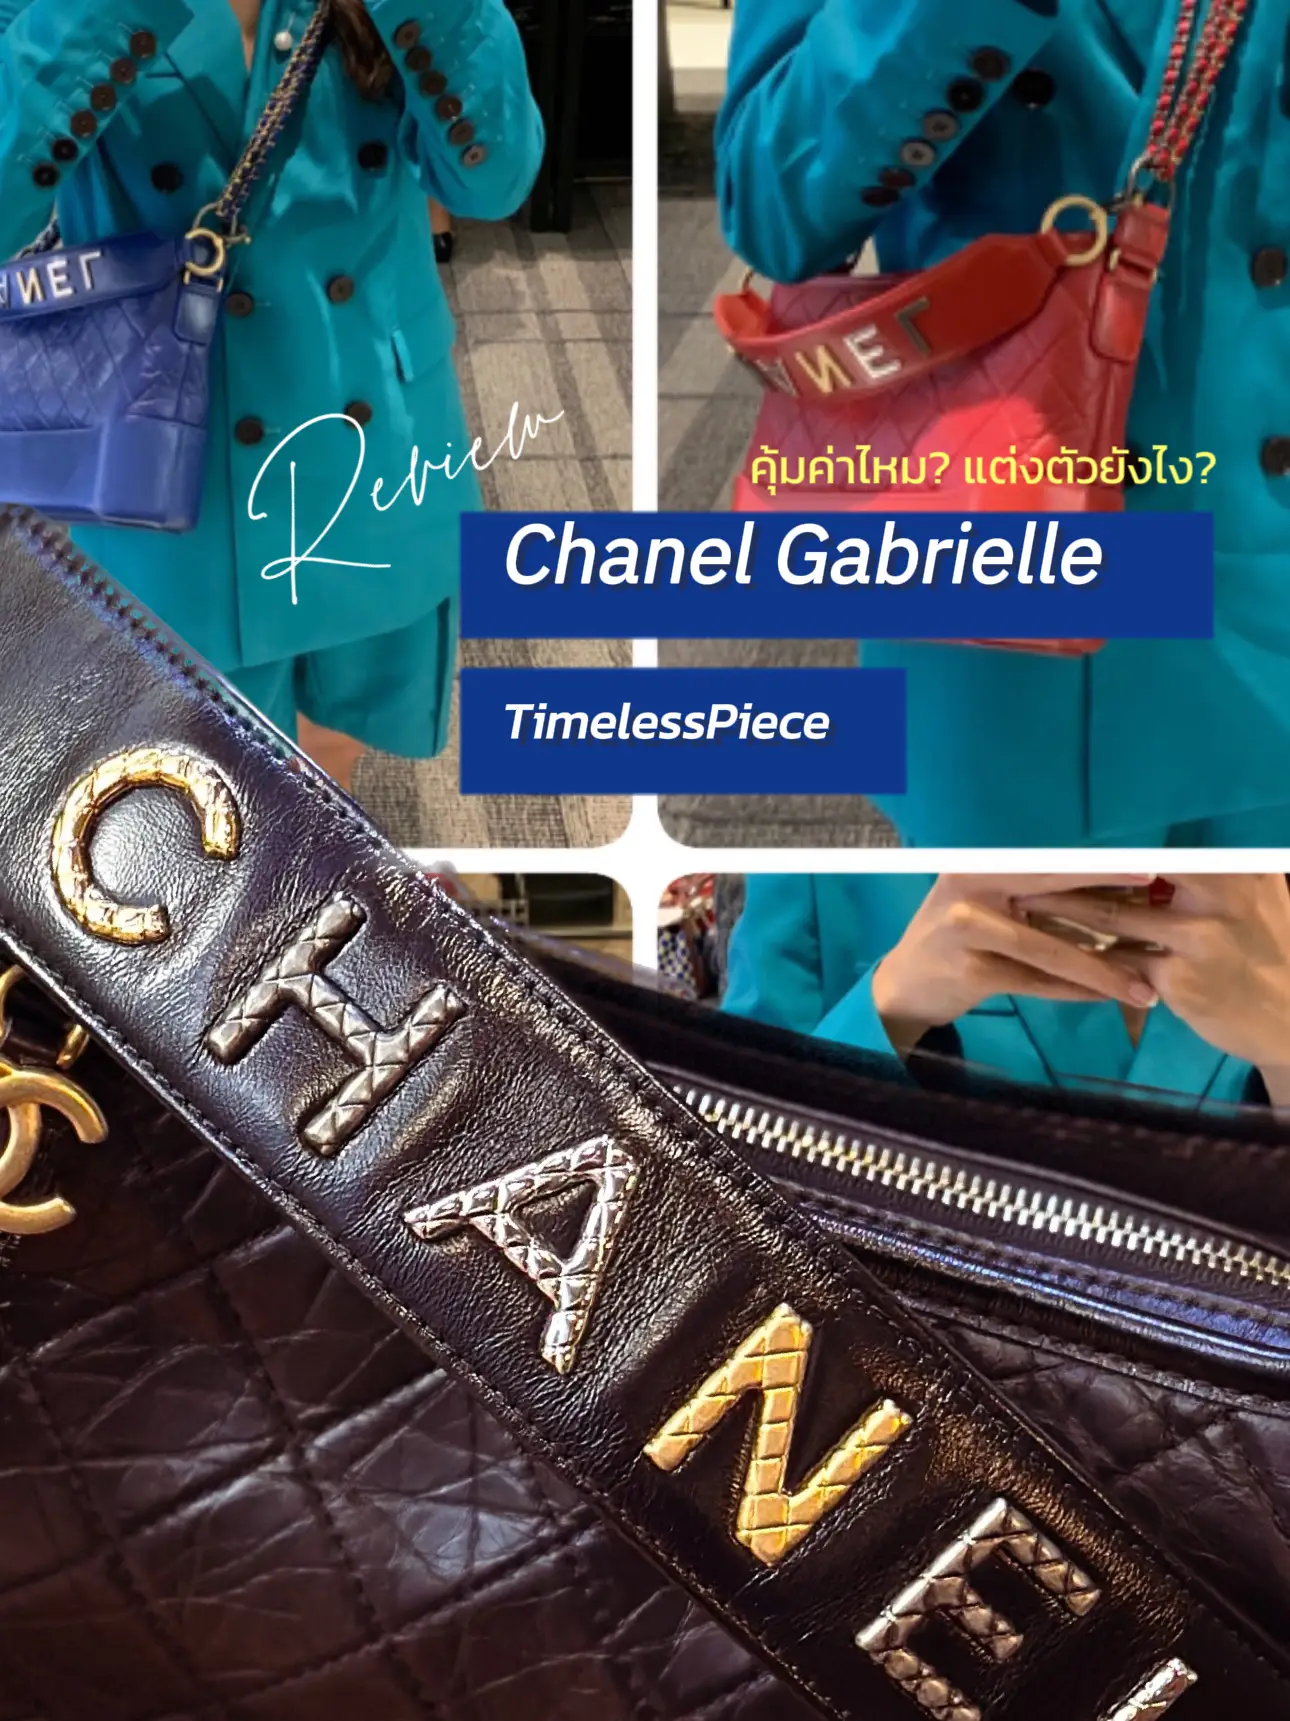 Is Chanel Gabrielle worth it? How to dress?